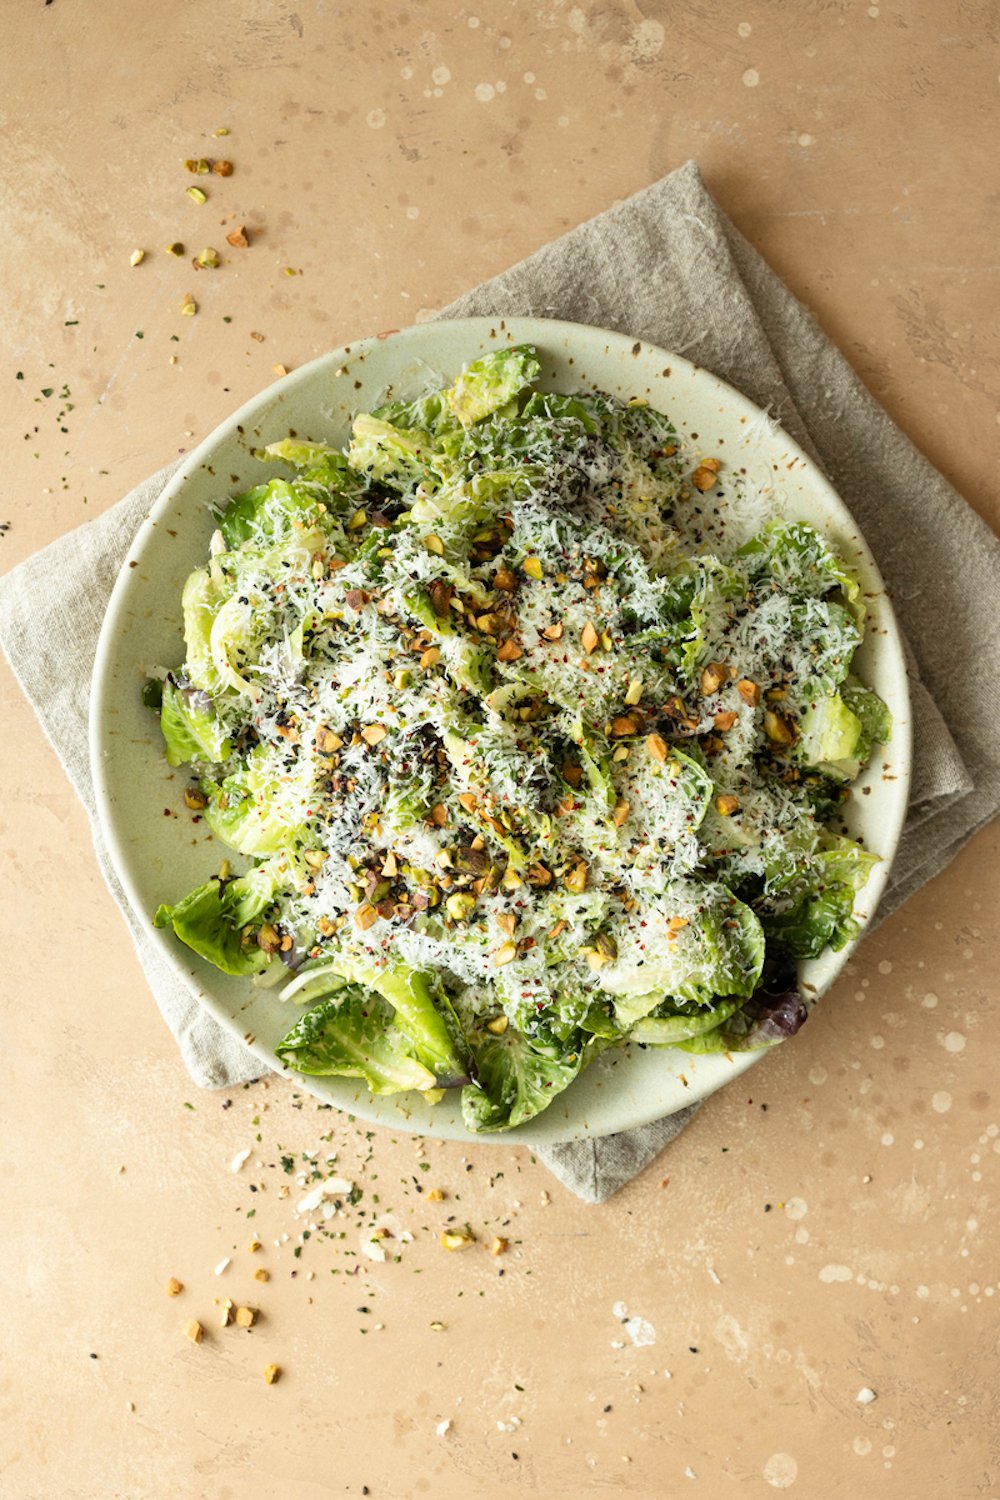 Green salad with sesame dressing.